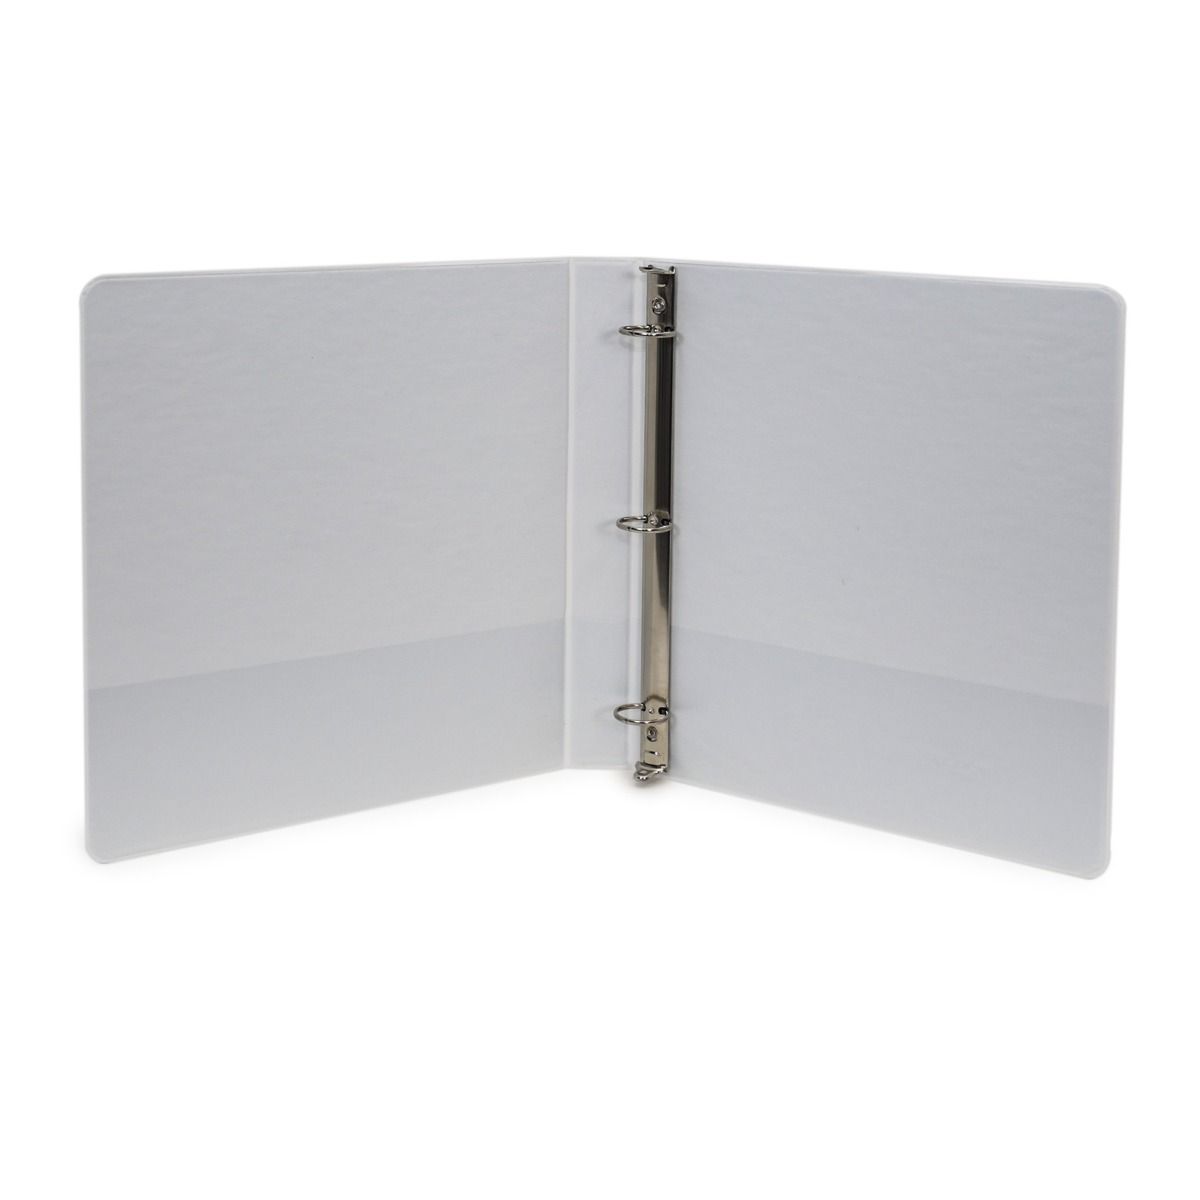 White Letter Size Standard View Ring Binders Image 1